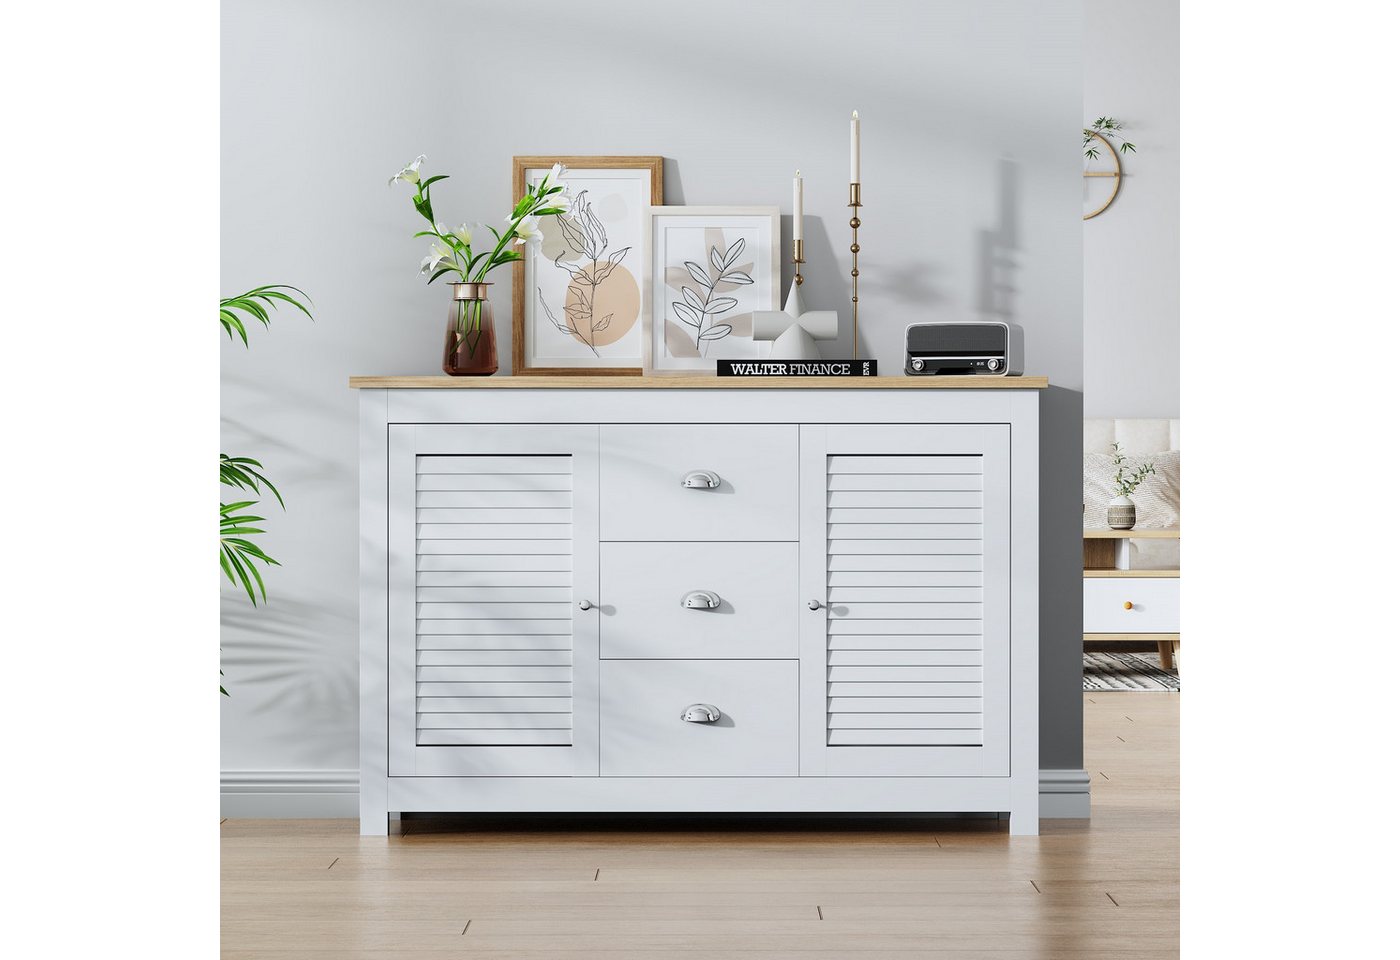 IDEASY Sideboard Chest of drawers, sideboard, 2 doors and 3 drawers, metal handles, 120*80*35cm, white, with adjustable shelves, widened tabletop von IDEASY